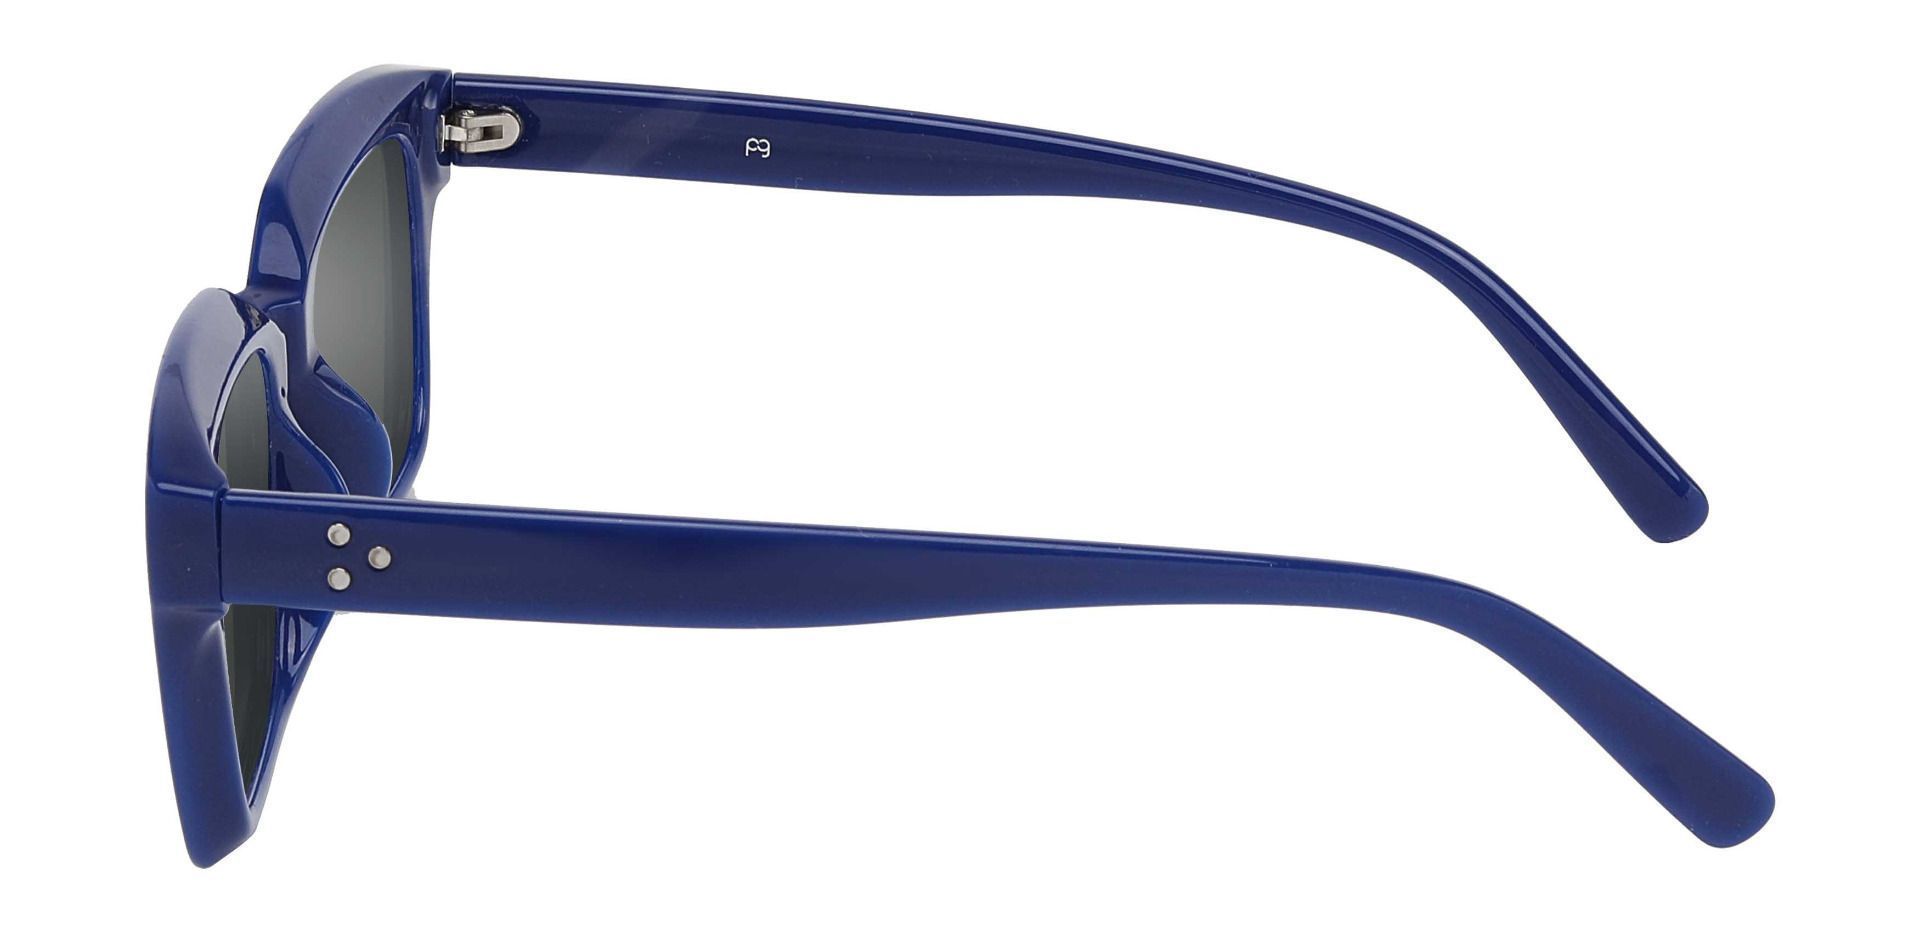 Unity Rectangle Non-Rx Sunglasses - Blue Frame With Gray Lenses